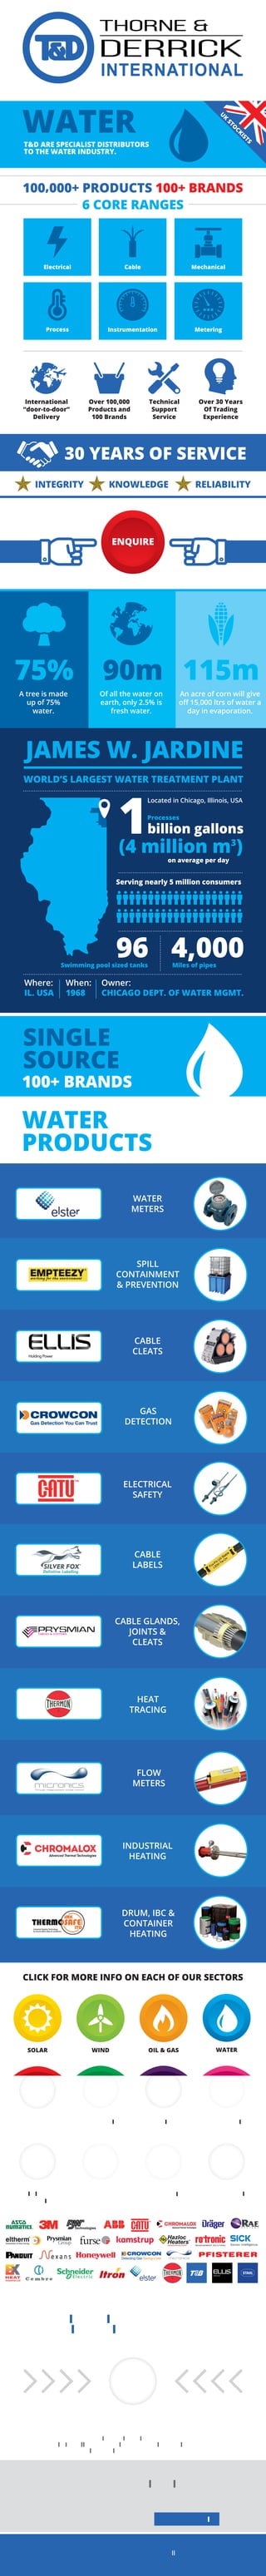 Infographic - See How T&D Support & Supply The Water Industry